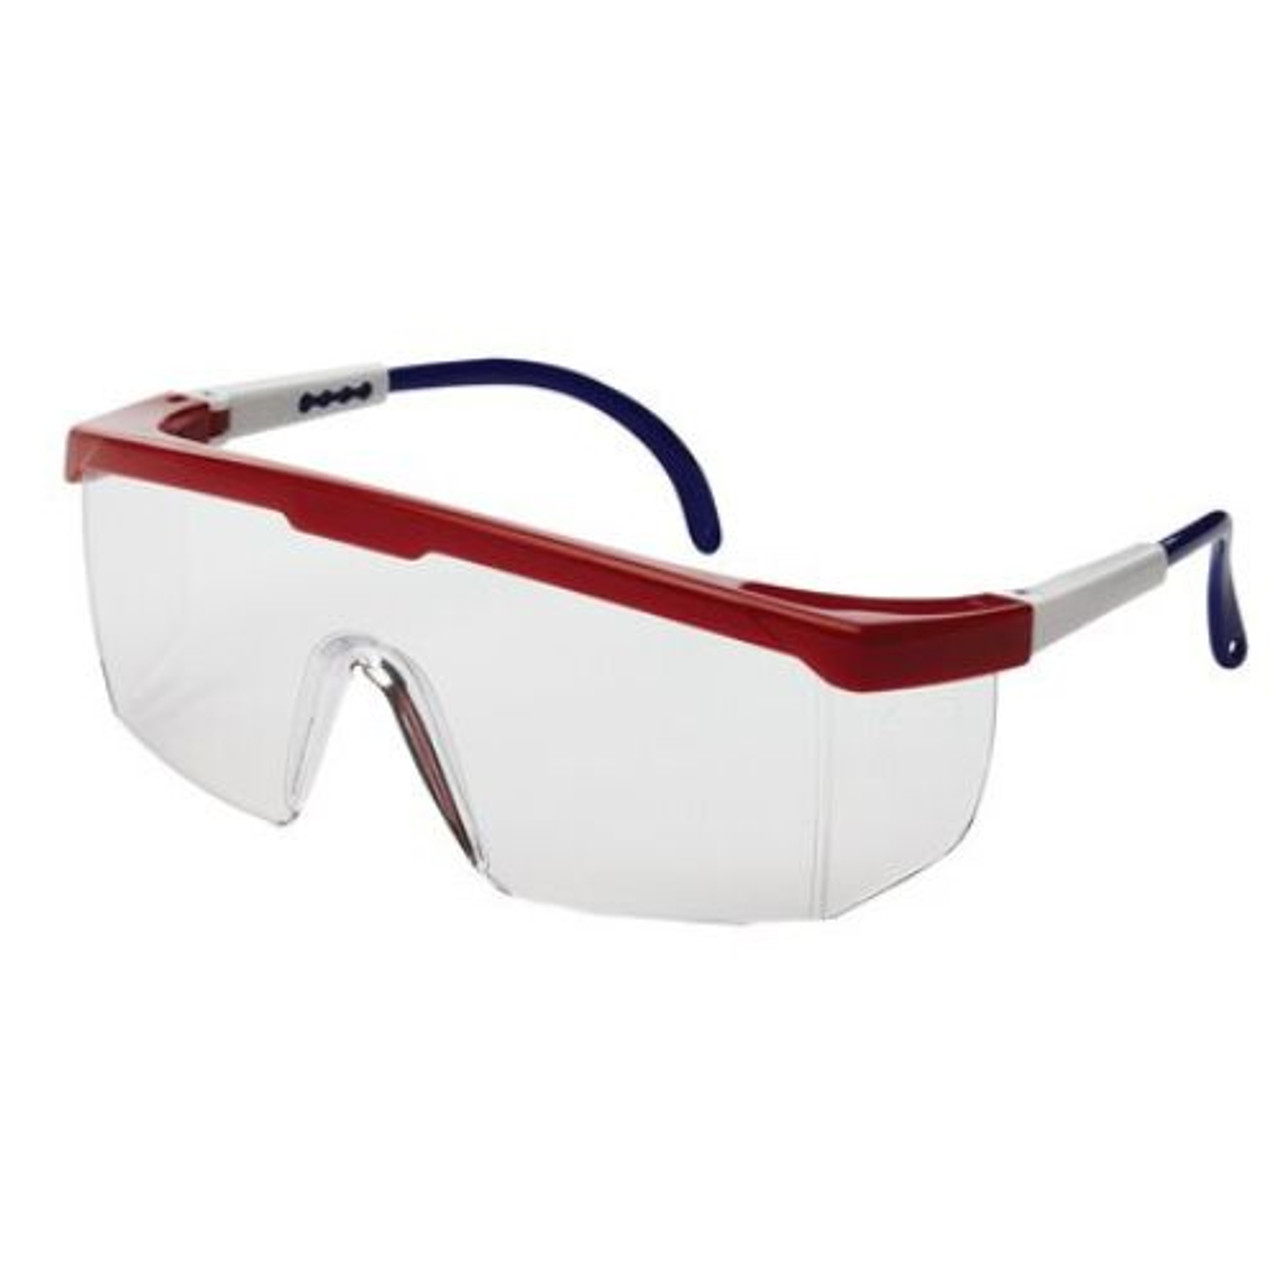 SureWerx Sellstrom Sebring Safety Glasses, Red, White, & Blue Frame w/  Clear Lens, 1/Each